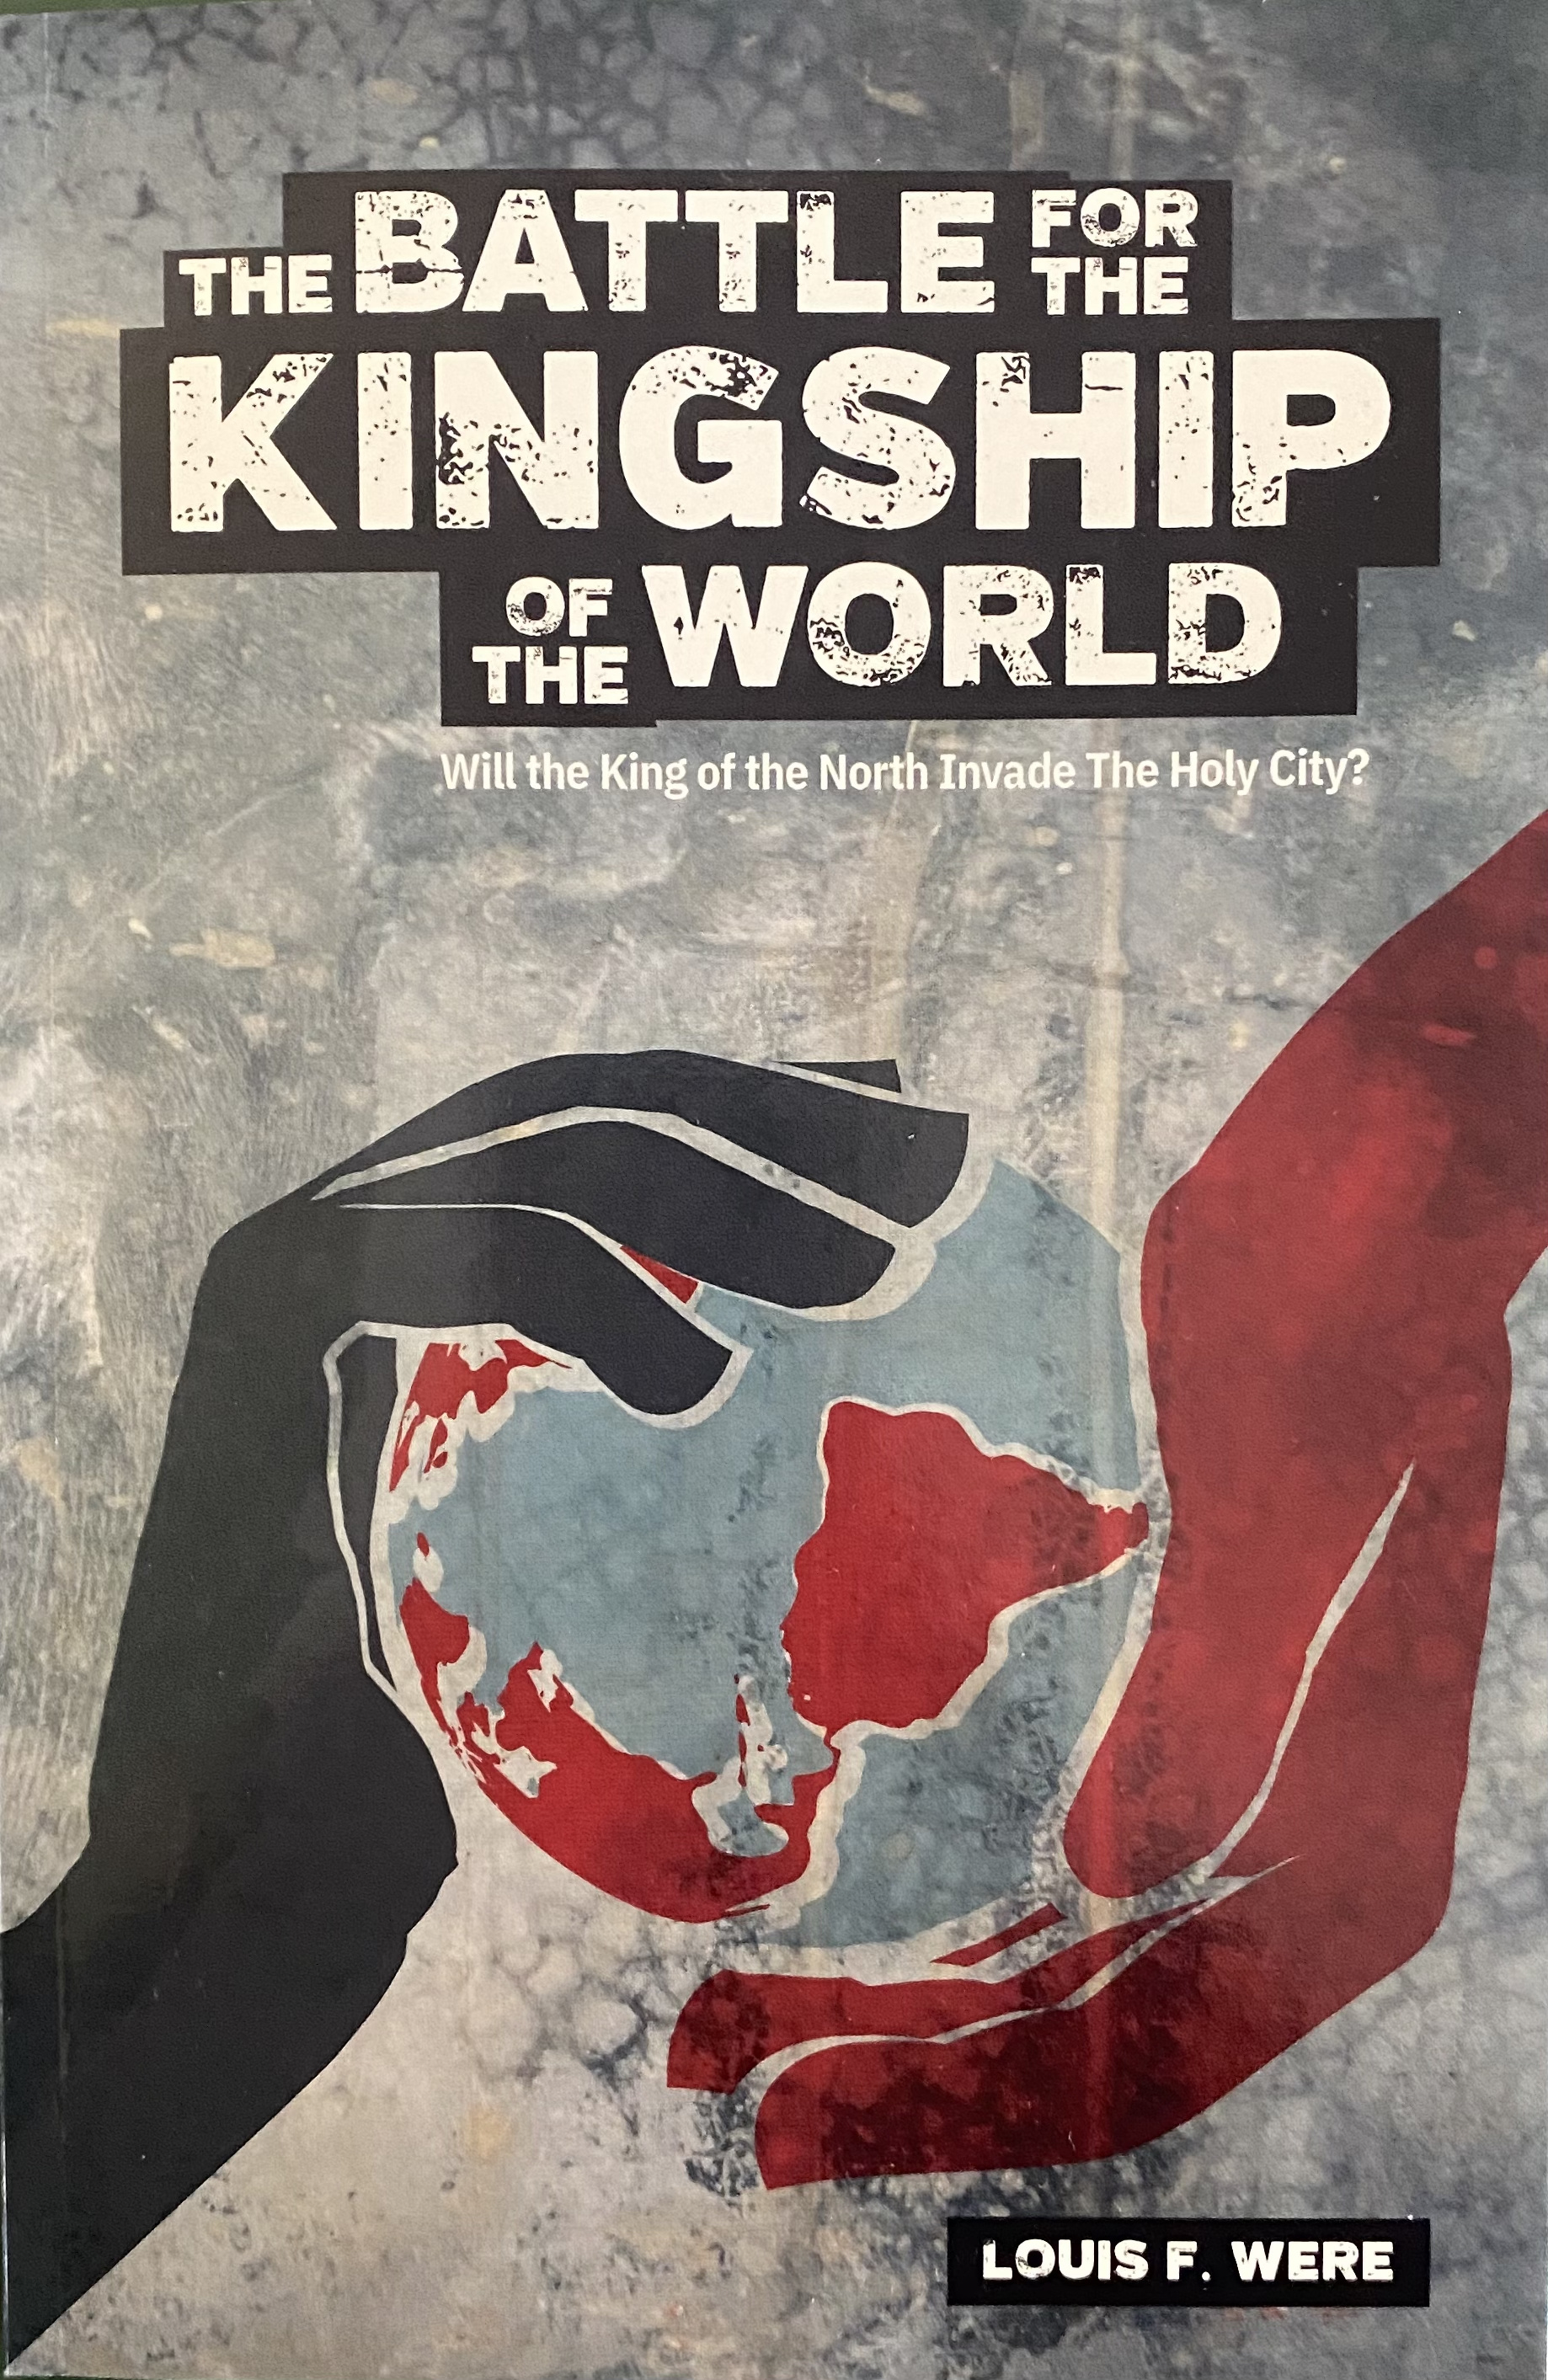  The Battle for the Kinship of the World